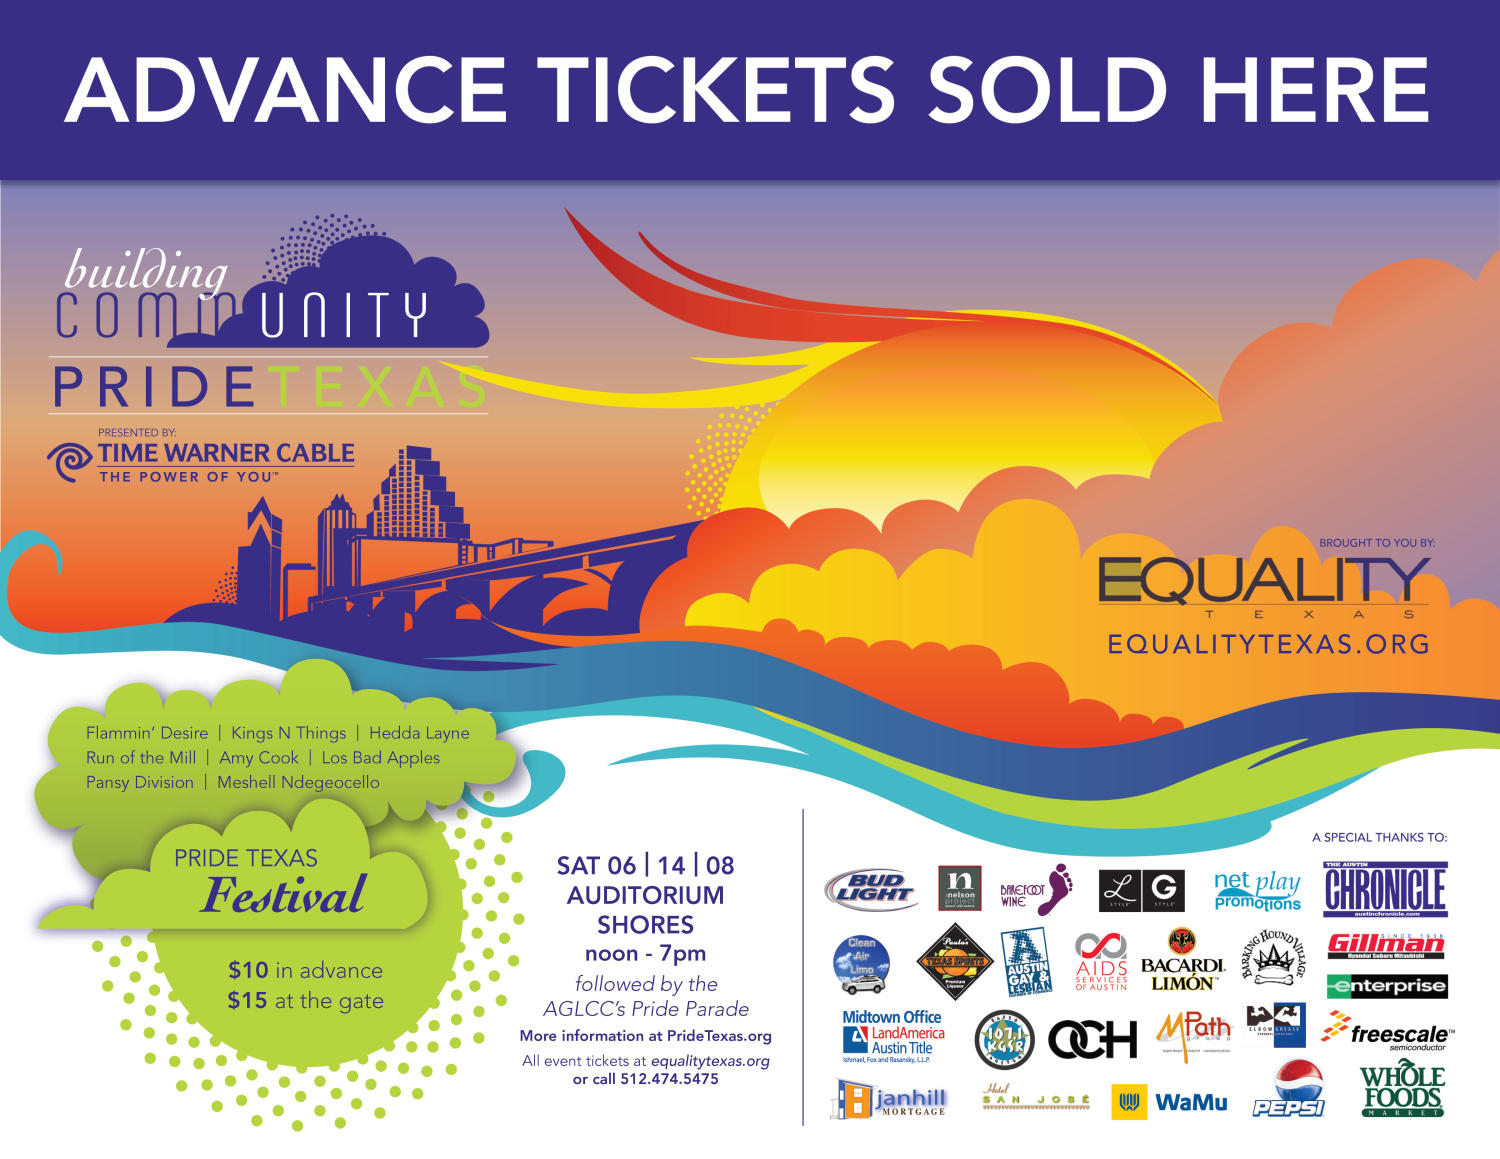 [Pride Texas Festival 2008 advance tickets poster]
                                                
                                                    [Sequence #]: 1 of 1
                                                